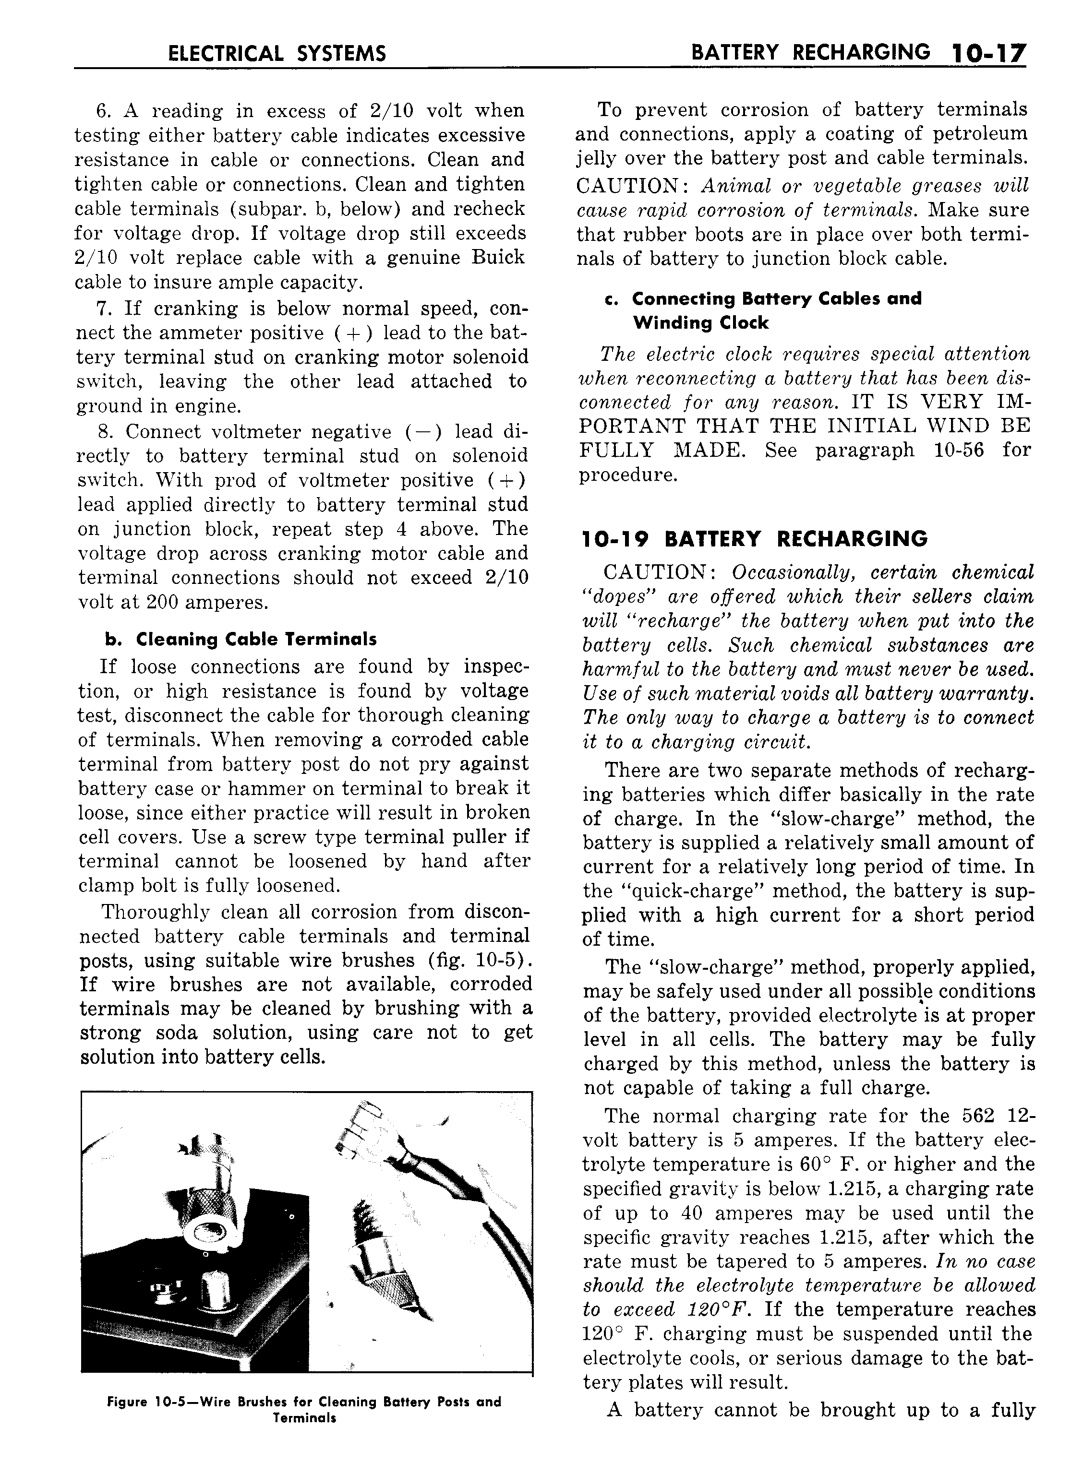 n_11 1957 Buick Shop Manual - Electrical Systems-017-017.jpg